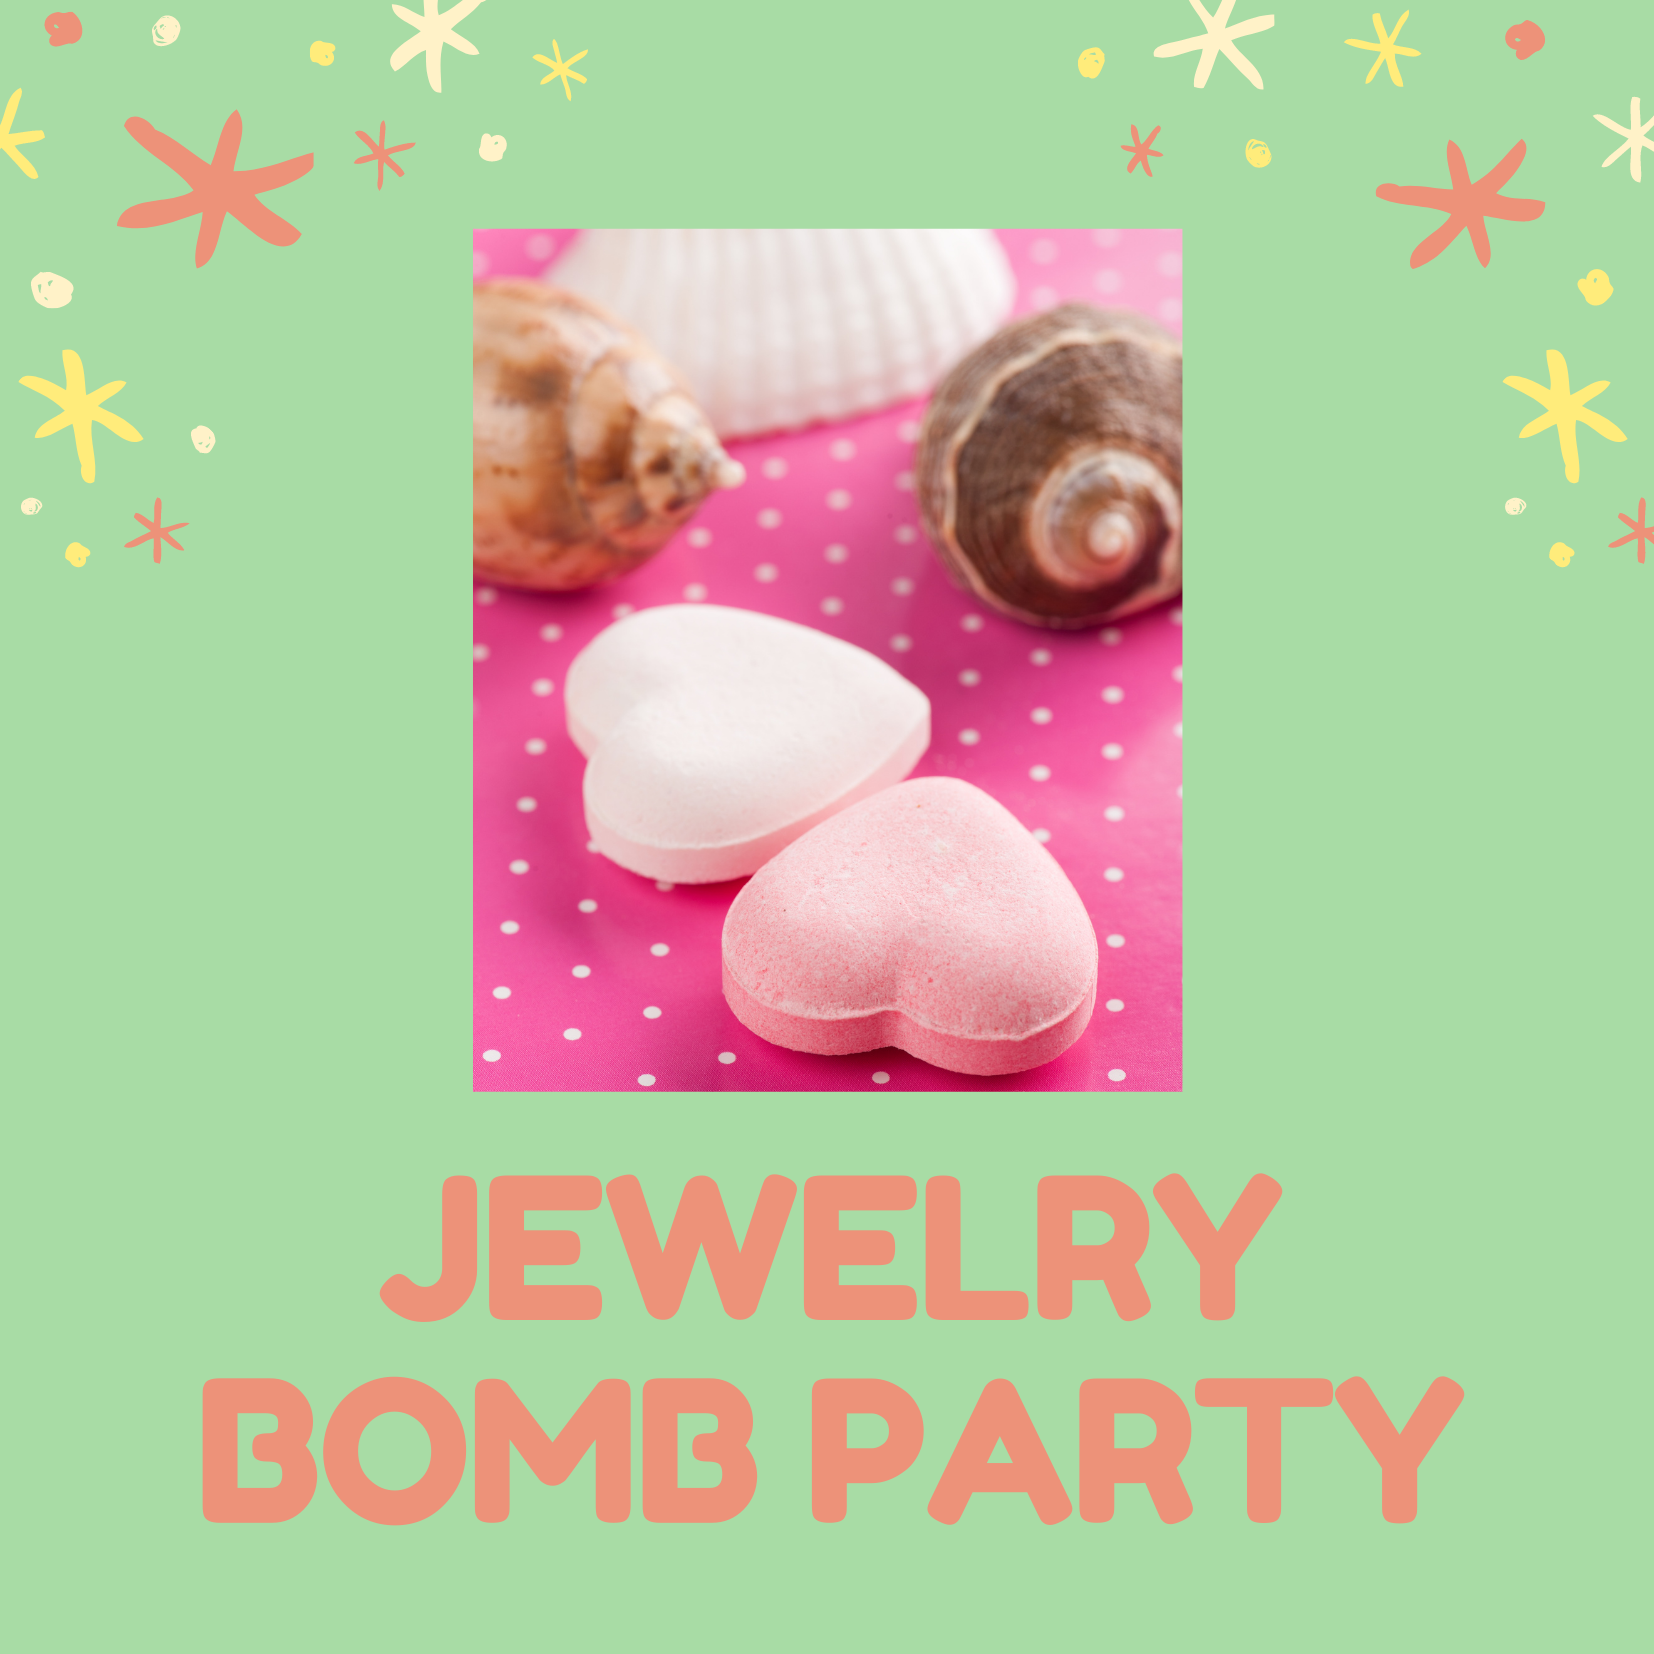 Jewelry Bombs & Oysters 4/15